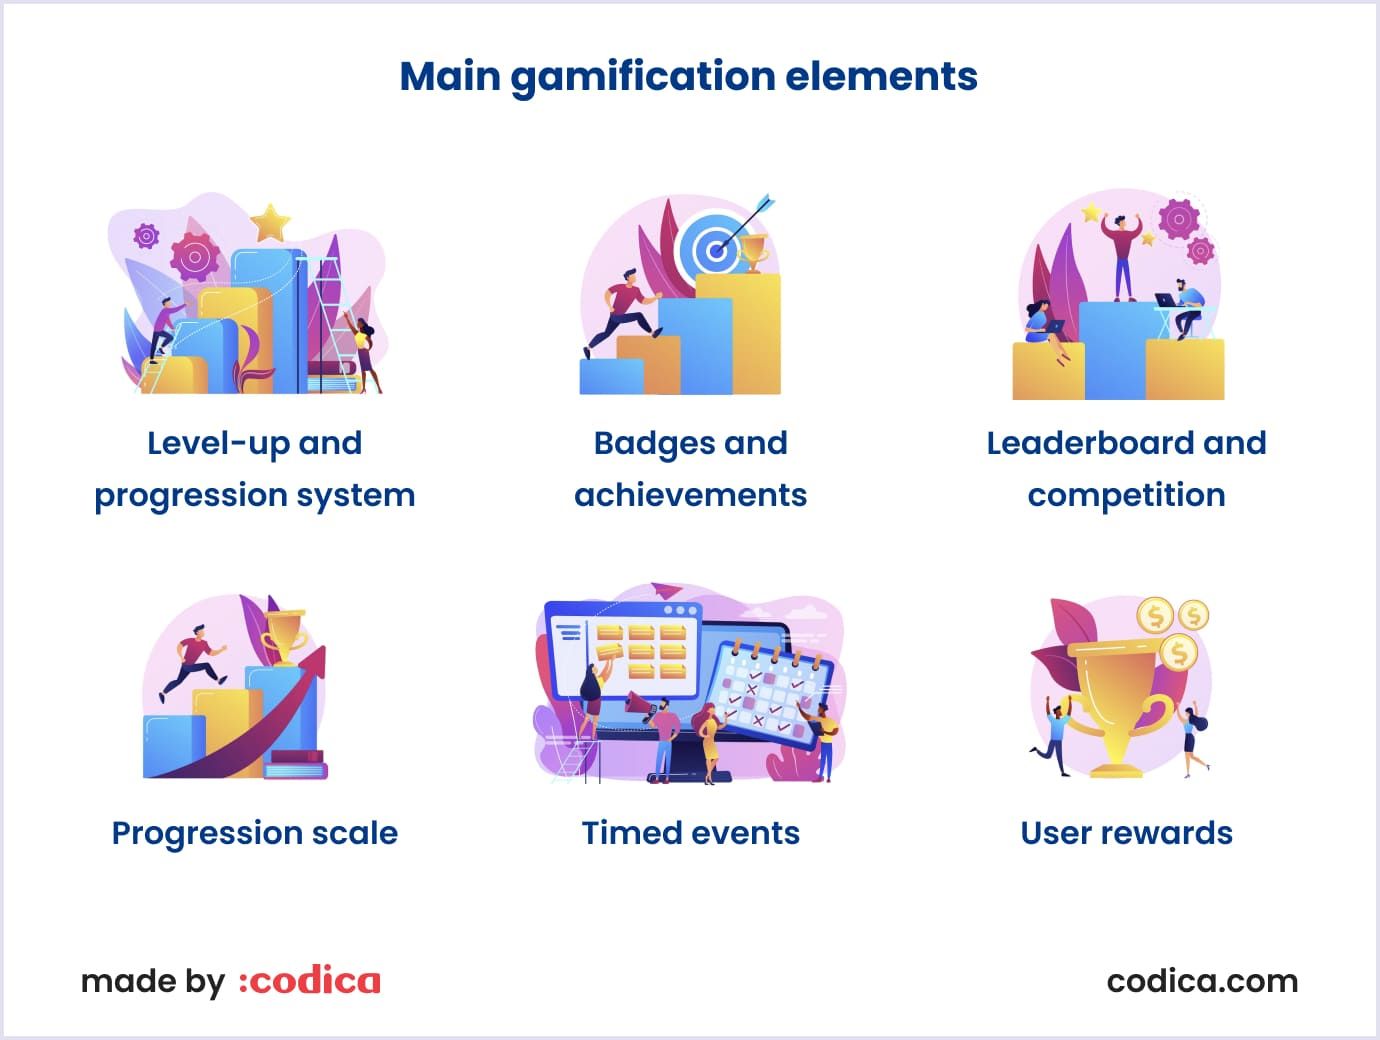 Most popular gamification elements